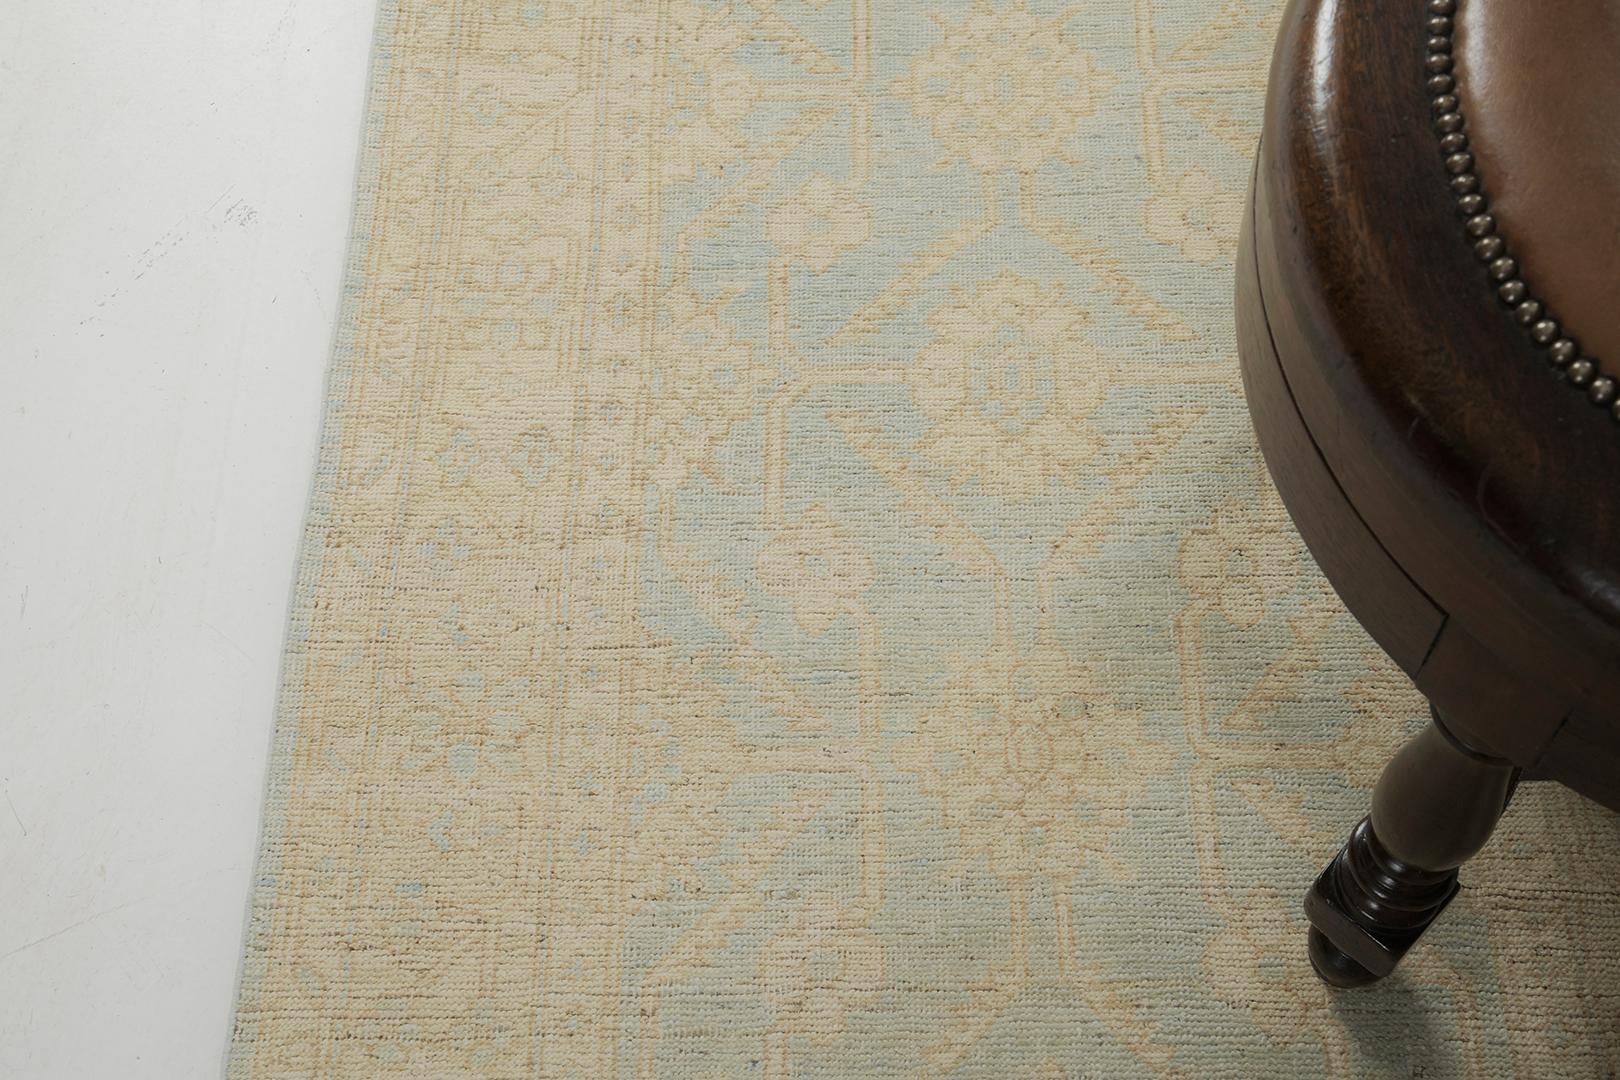 Featuring a revival of the Khotan Vintage-styled runner with 3 layers of borders. This rug works to bring together various ornamentation. Florid elements and medallions are perfectly established with a wash tone of camel, coffee, and blue hues.